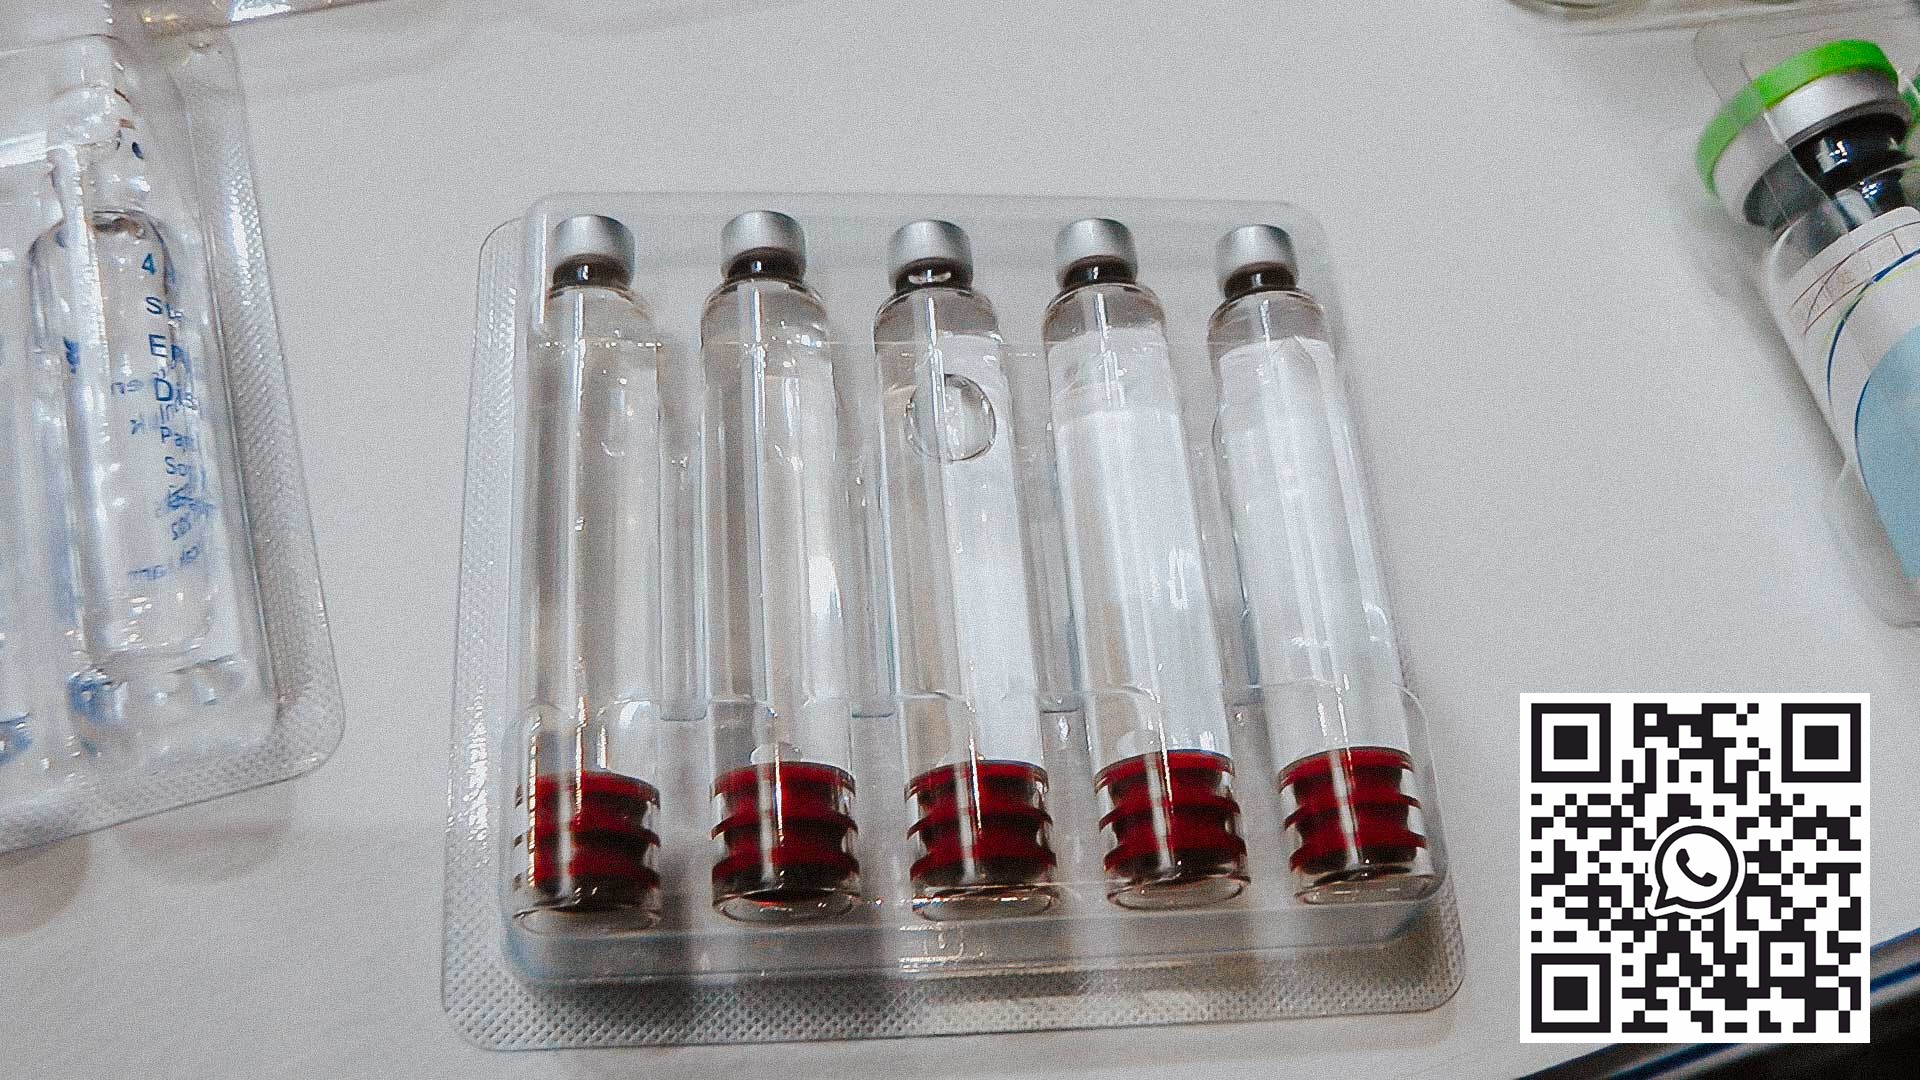 Equipment for packing glass ampoules and penicillin bottles in PVC and aluminum blister